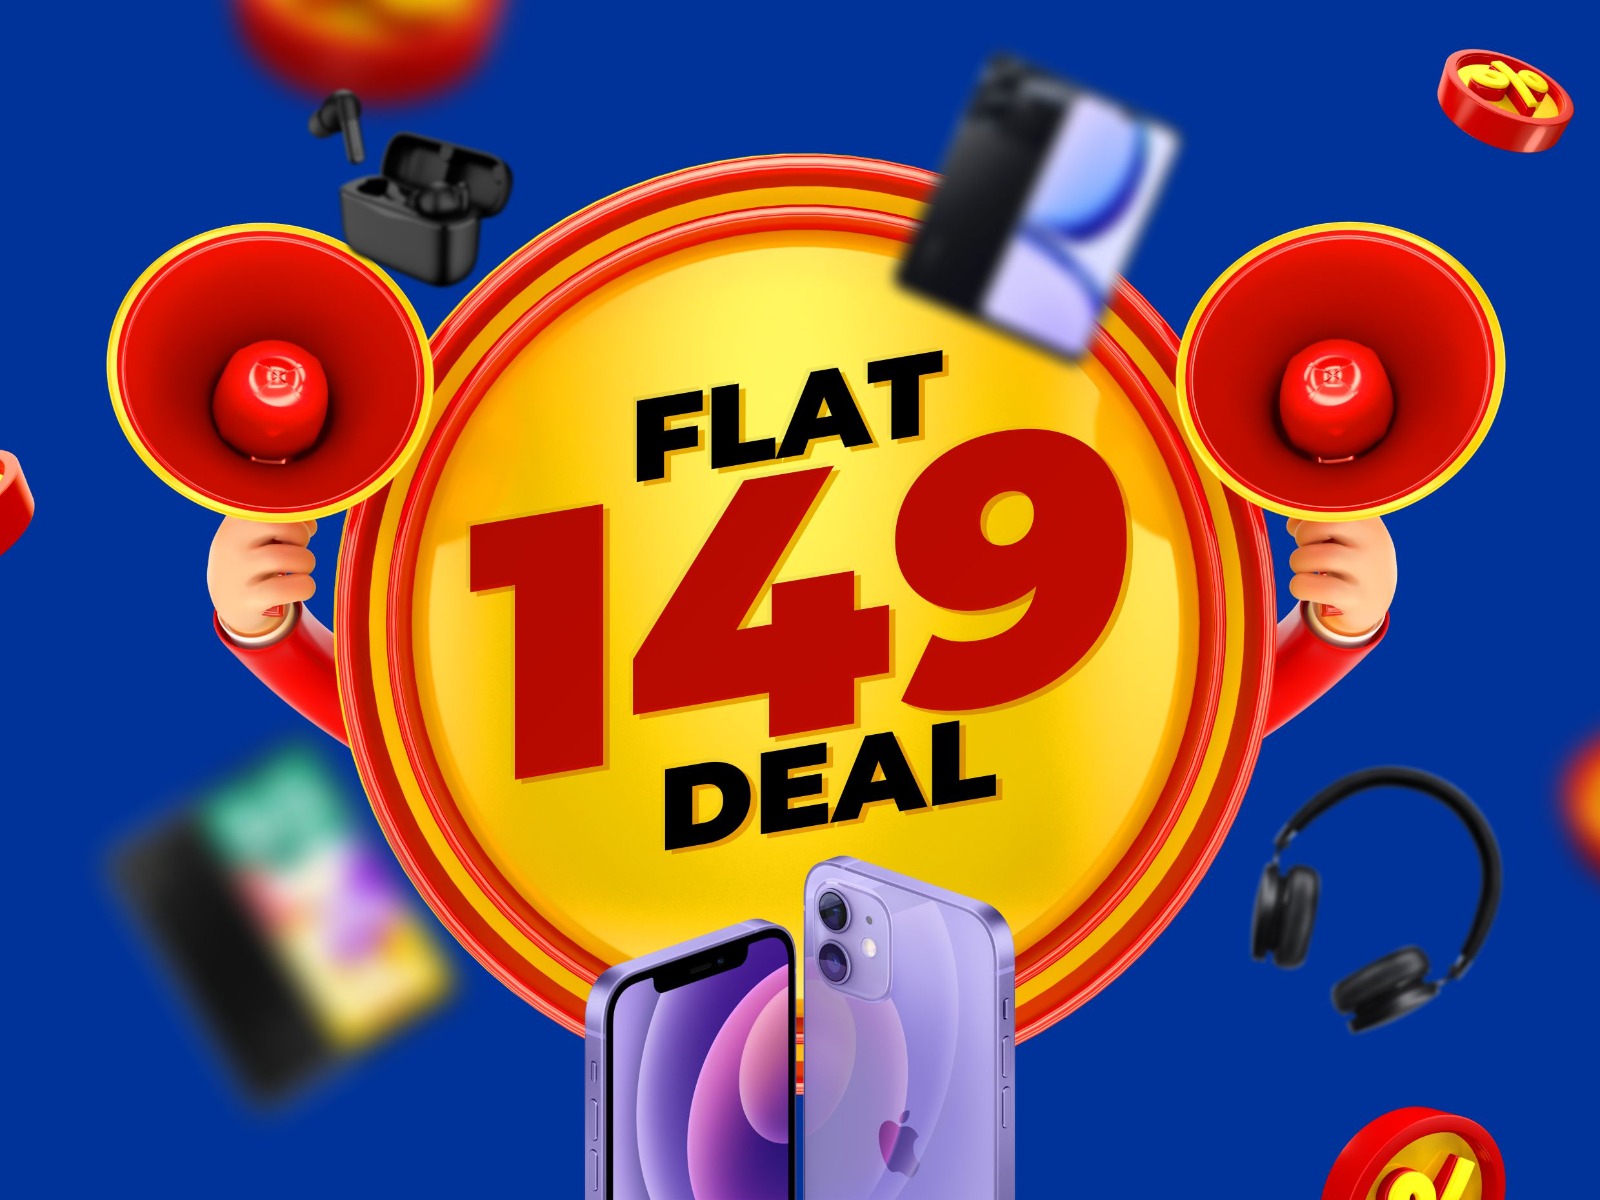 Fonezone.ae - 149 DEAL of the Day